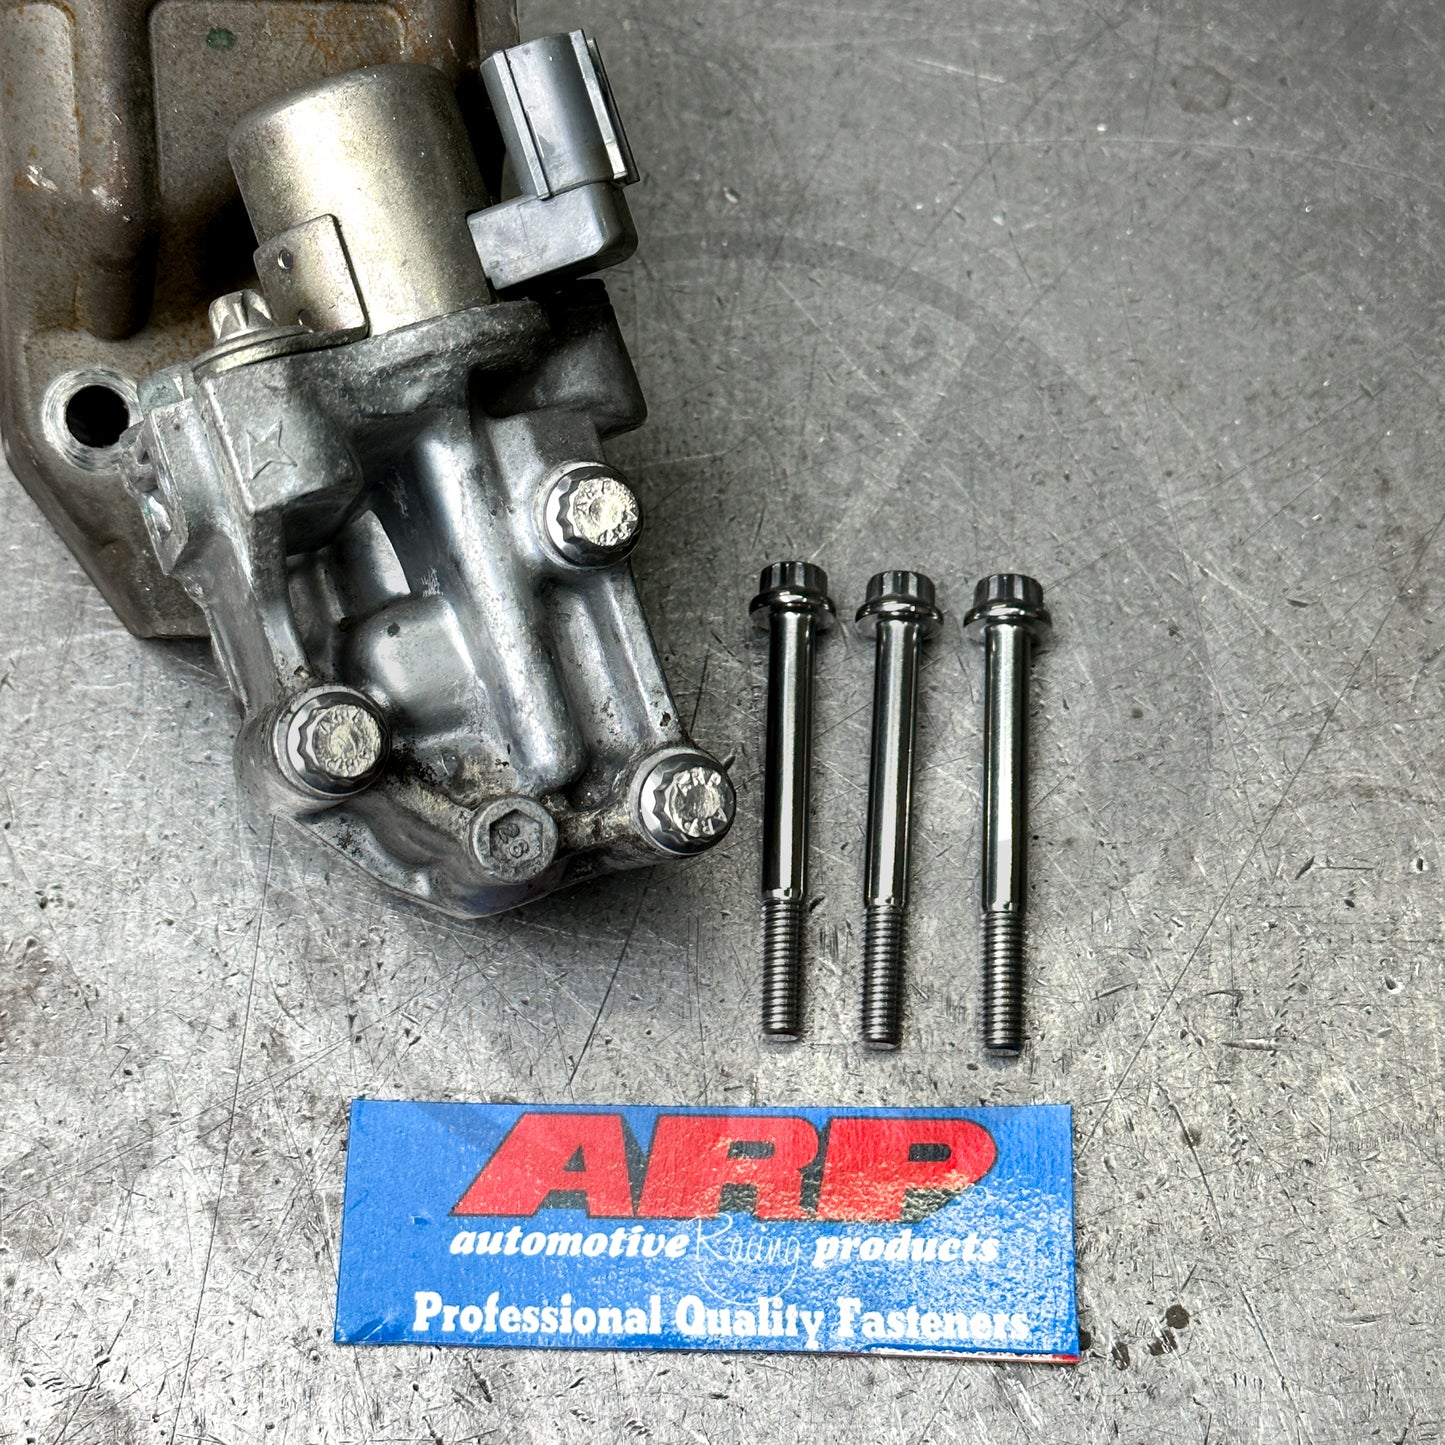 ARP Stainless Steel VTEC Solenoid Hardware Bolt Replacement for Honda Civic Acura K20 / K24 Engines